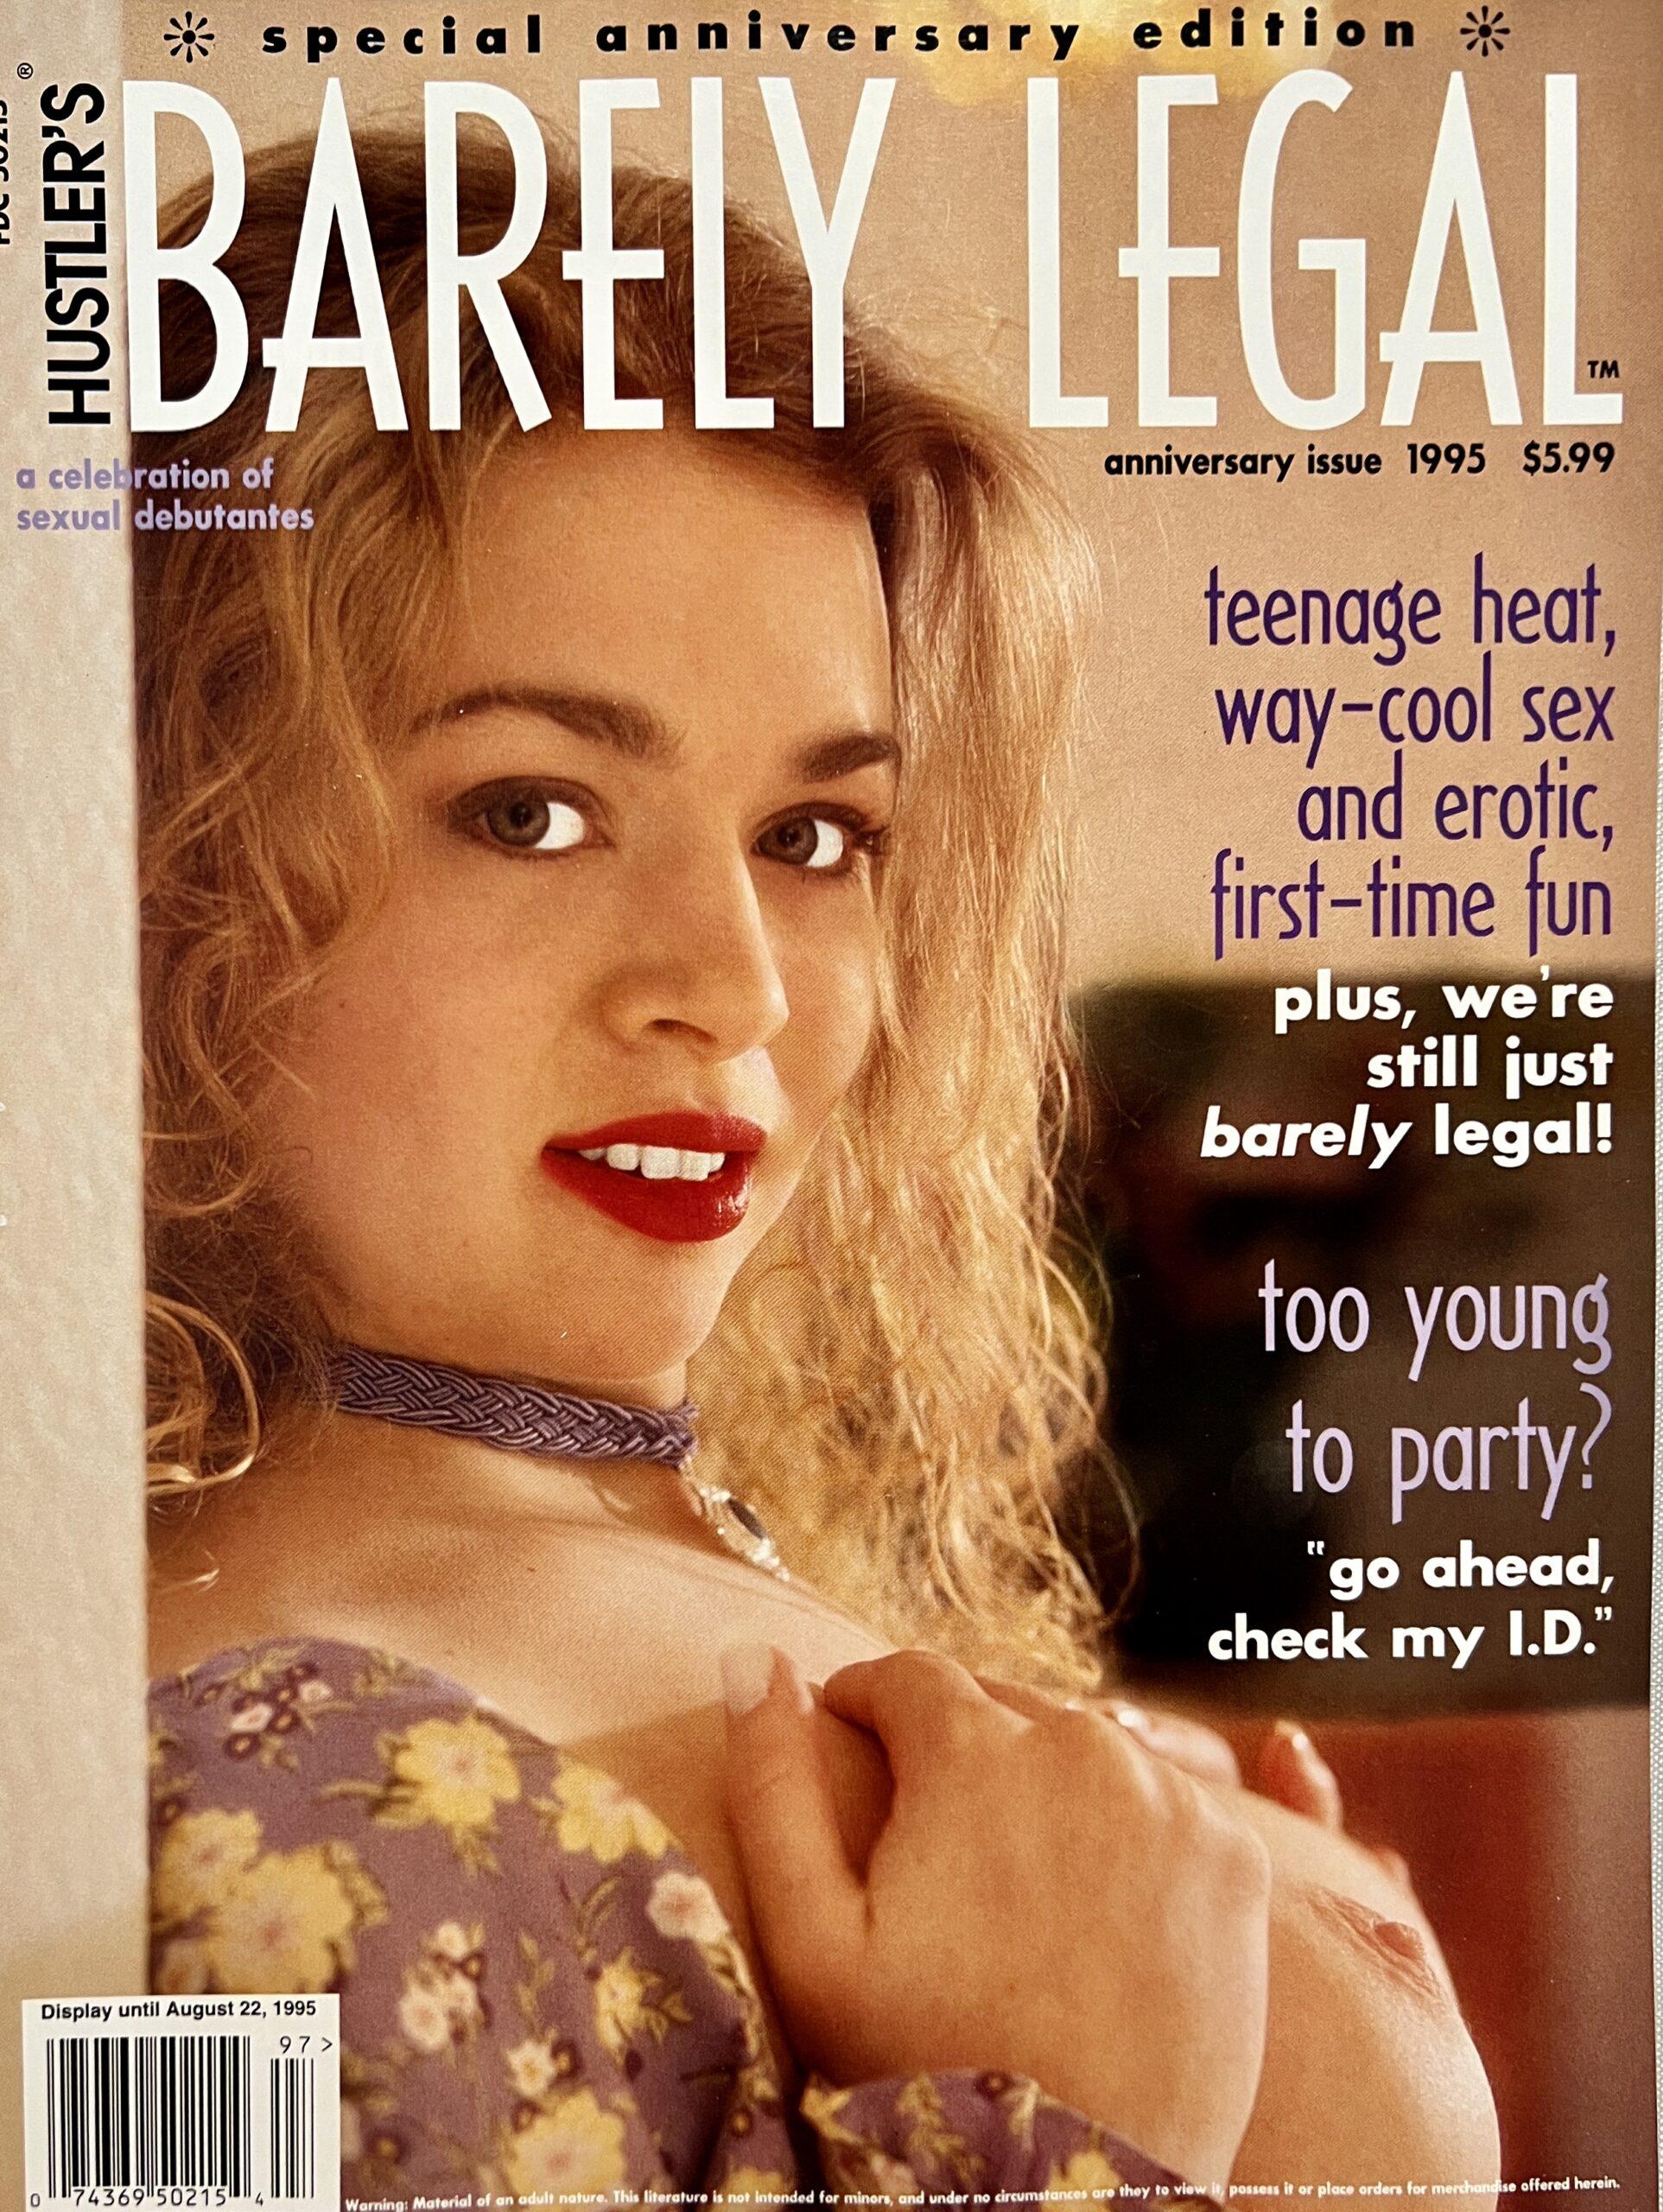 Barely Legal Anniversary Issue 1995 Vintage Magazines 16 5565